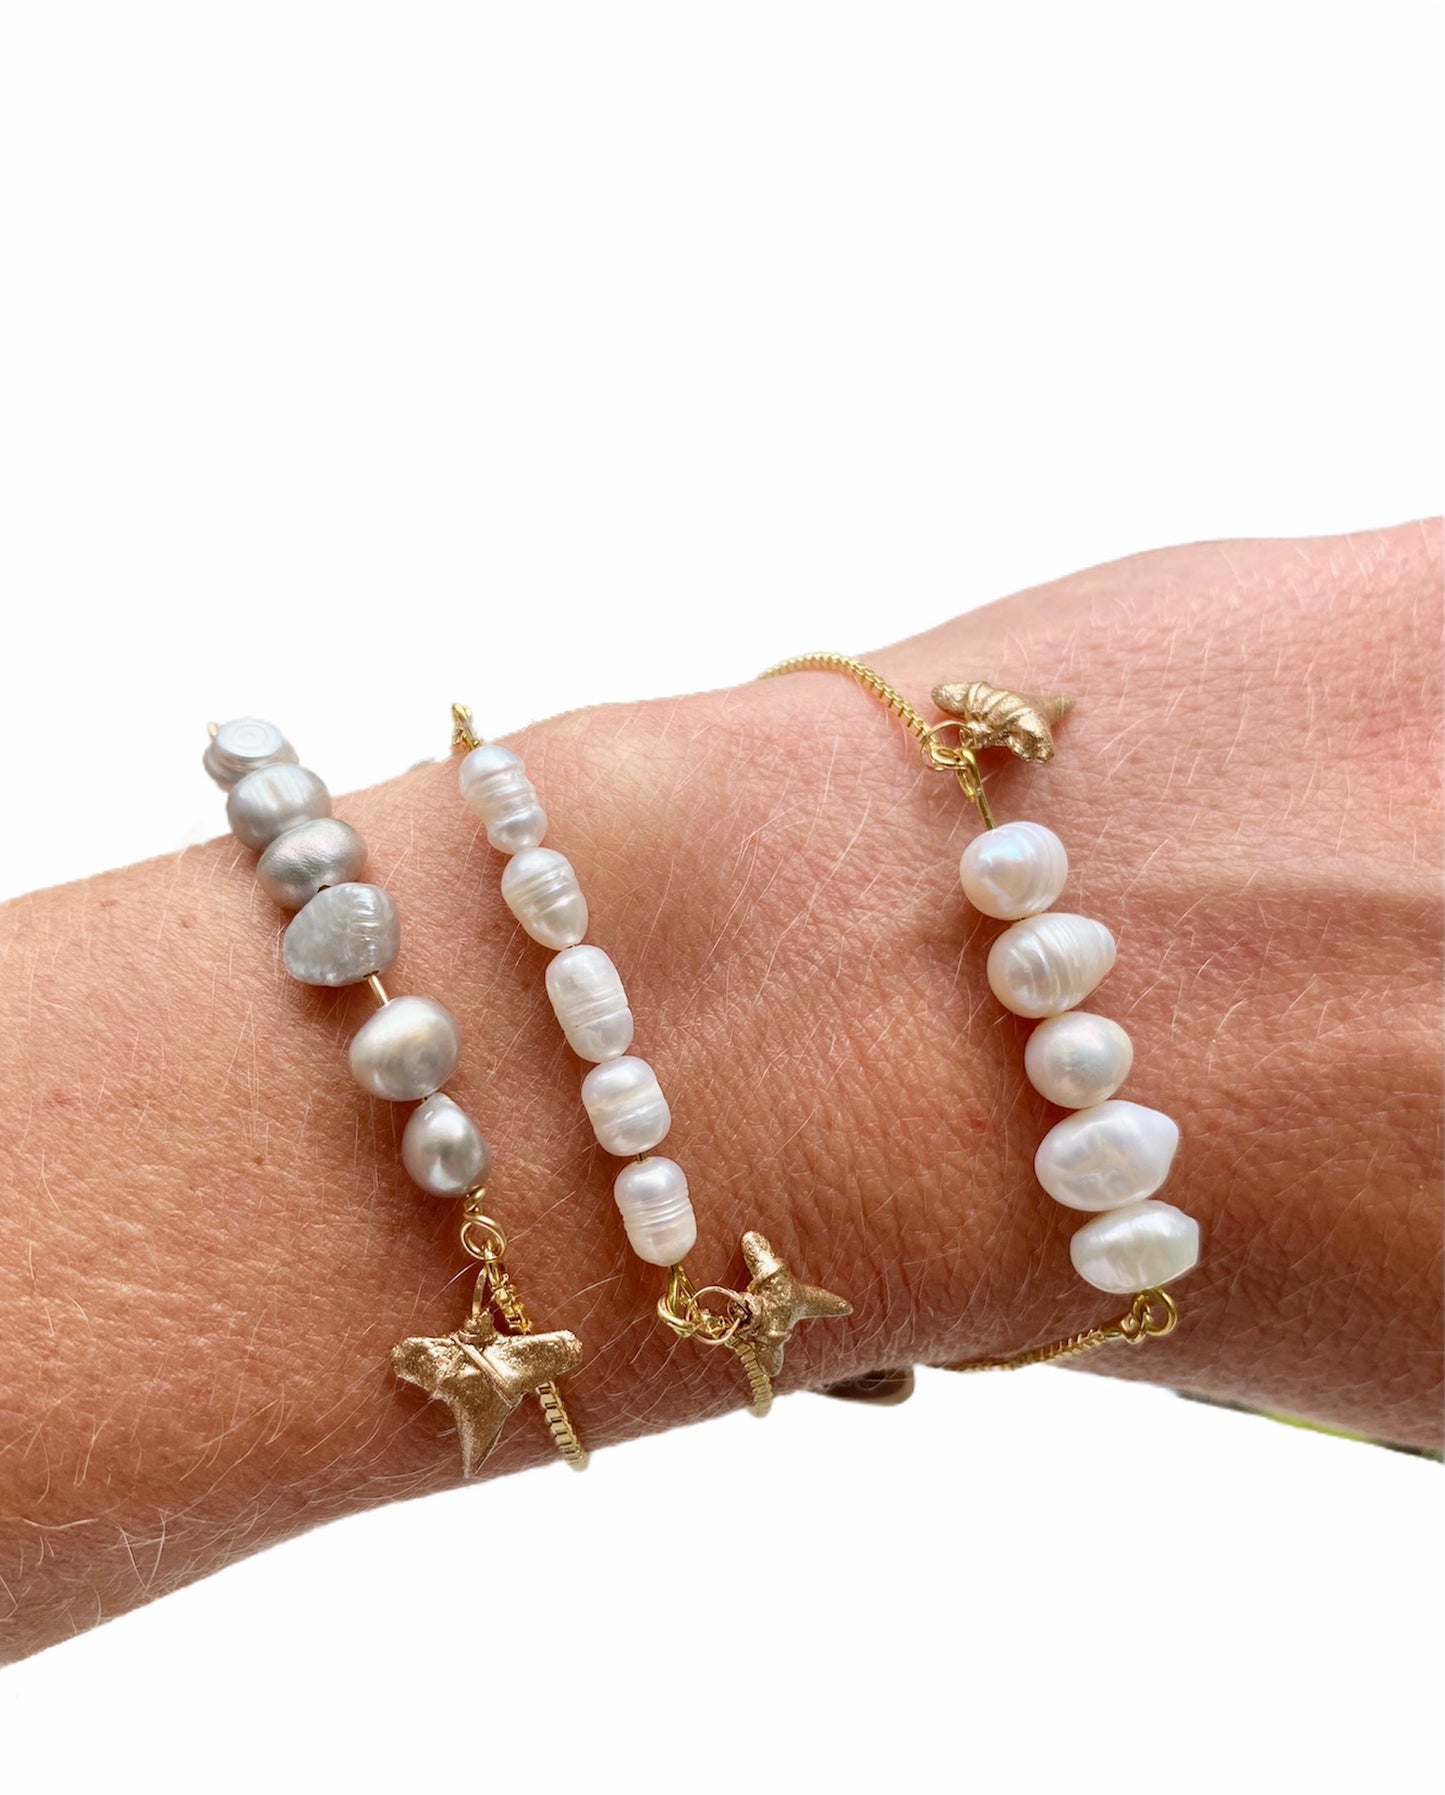 Shark Tooth and Pearl Charm Bracelet